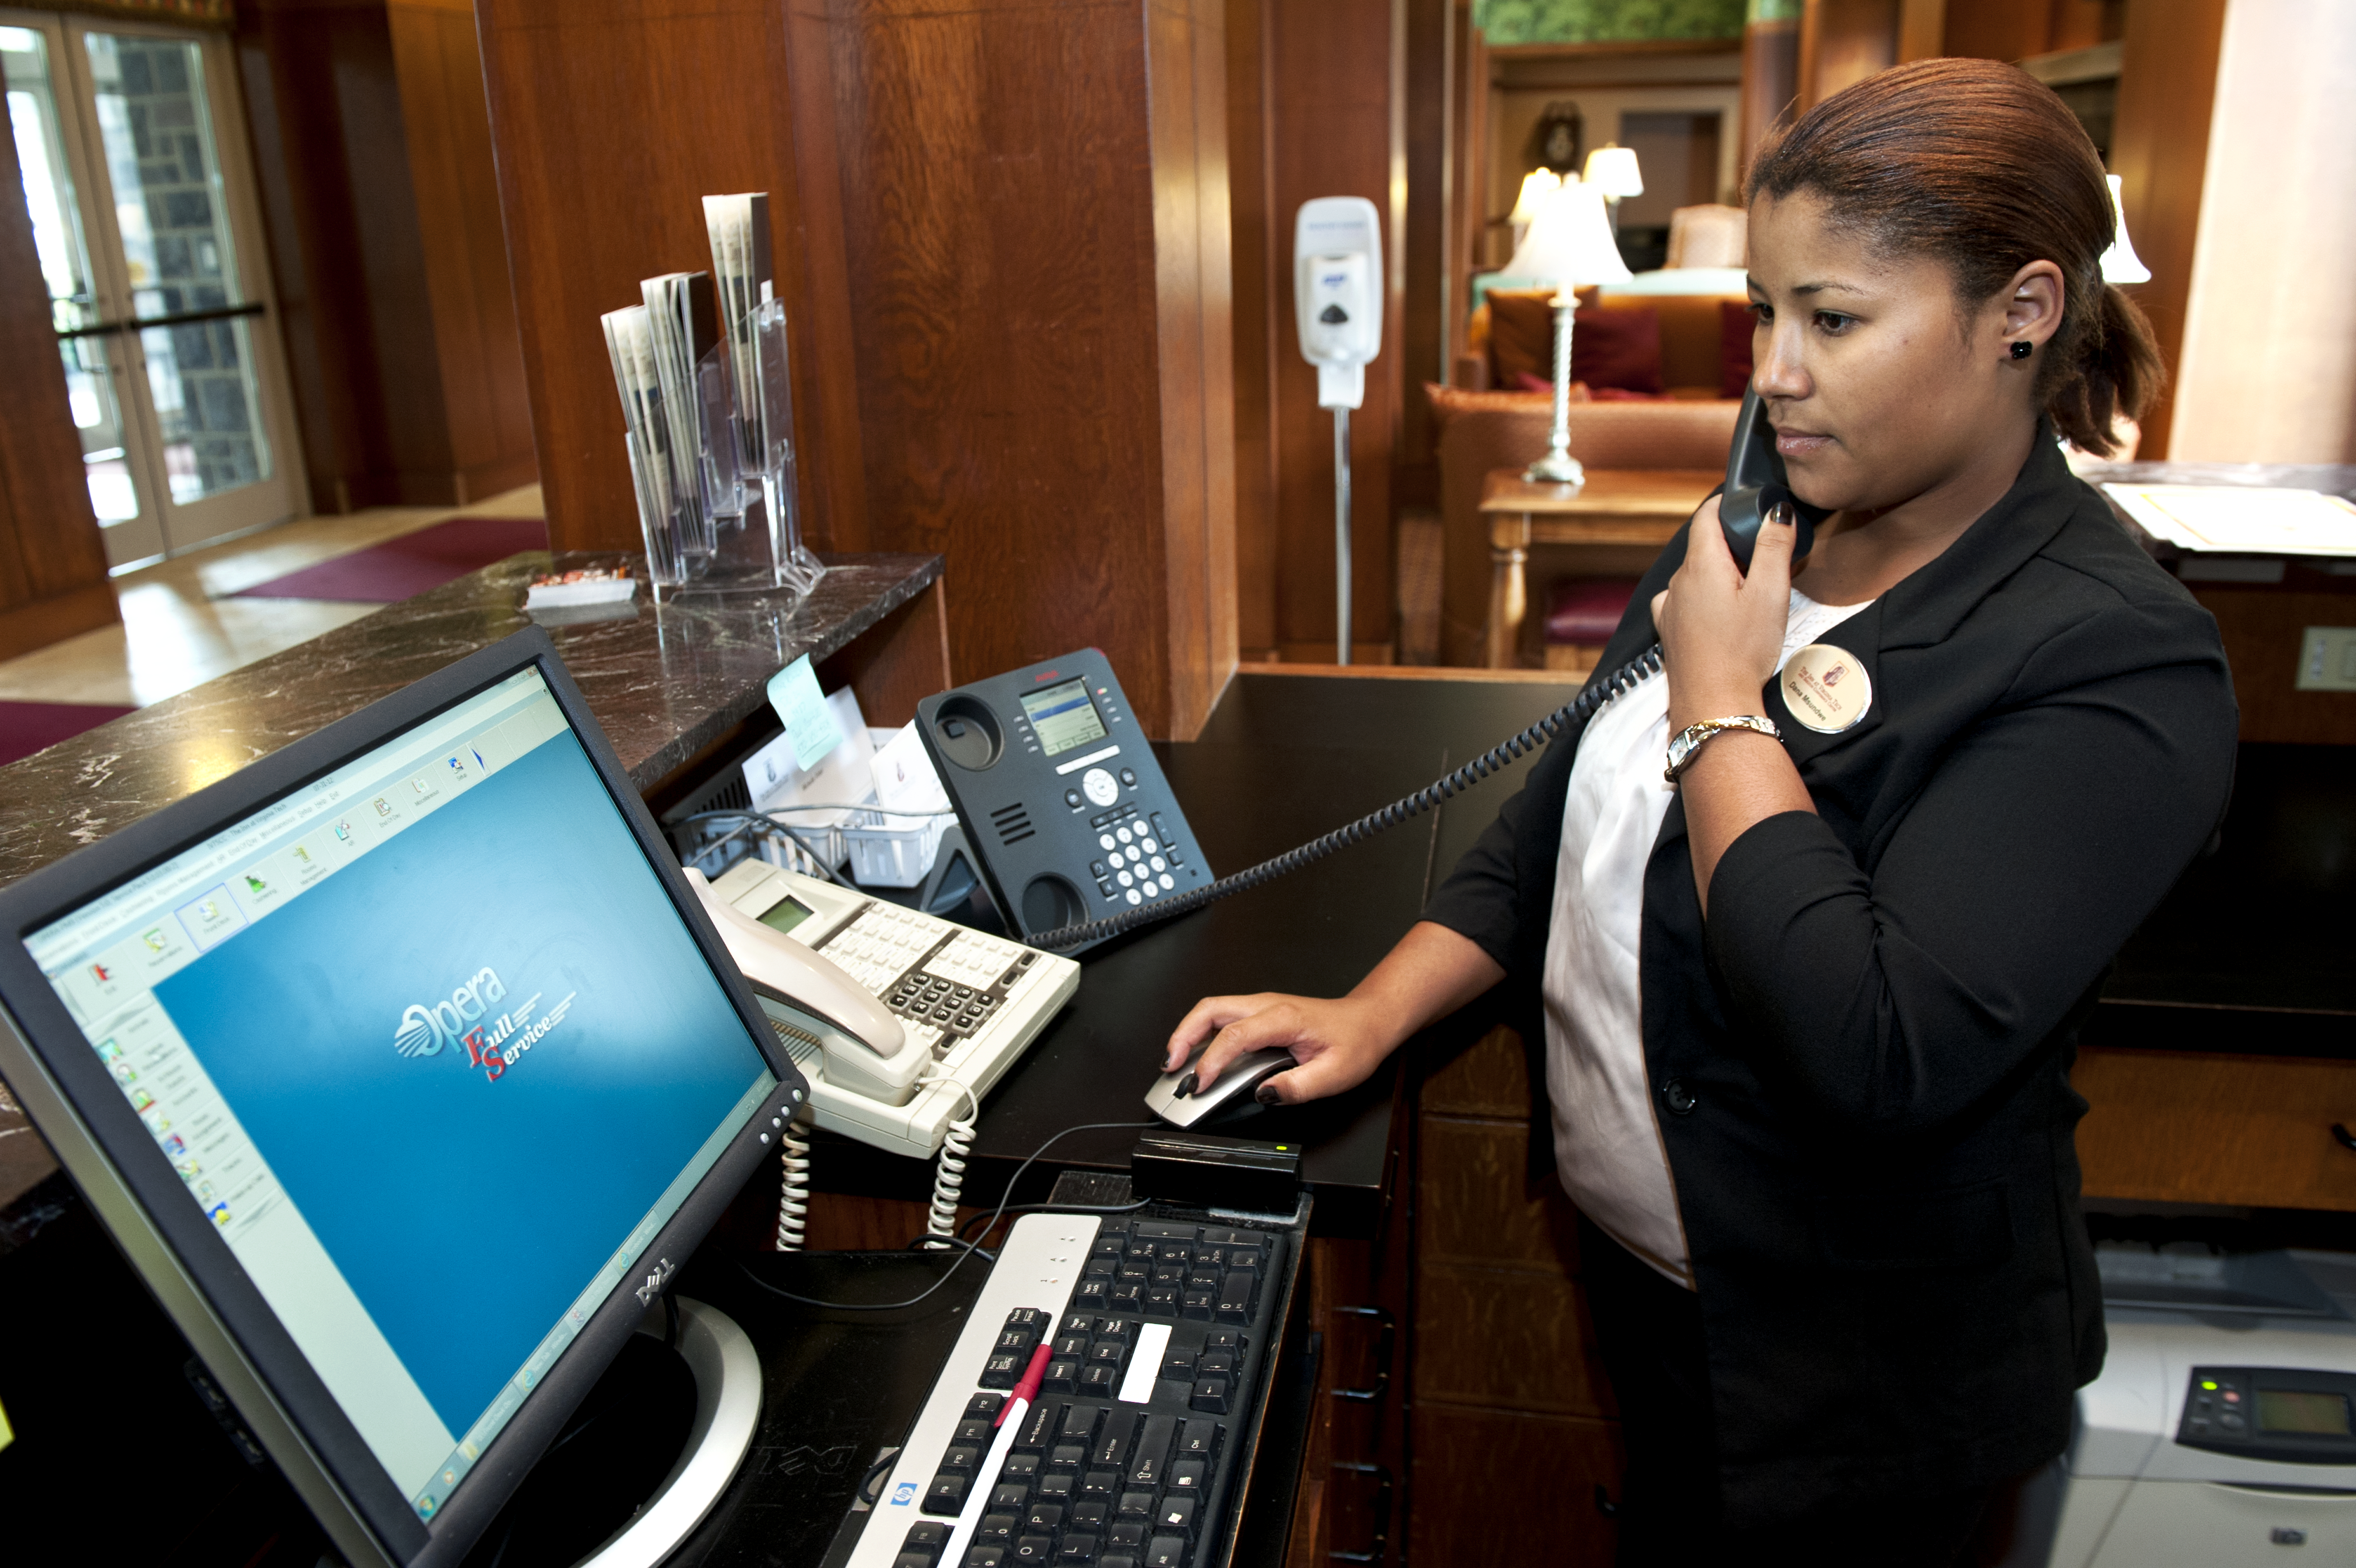 A hotel front desk clerk uses one of the new phones installed as part of the unified communications switchover